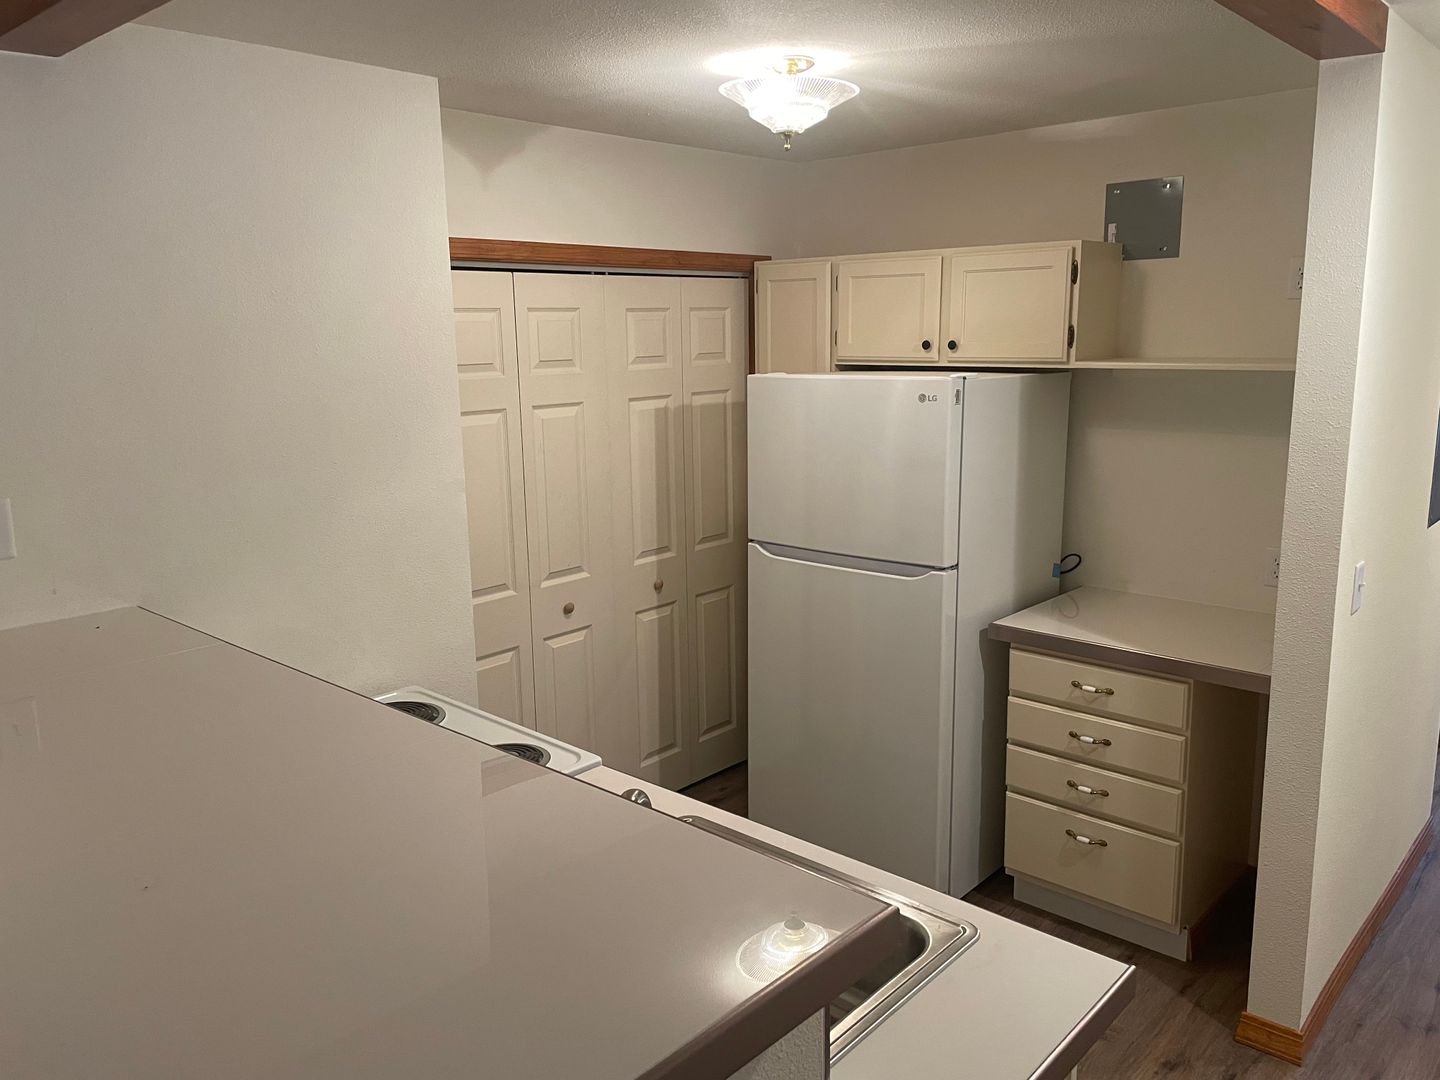 Large Three Bedroom on the North Side of Durango